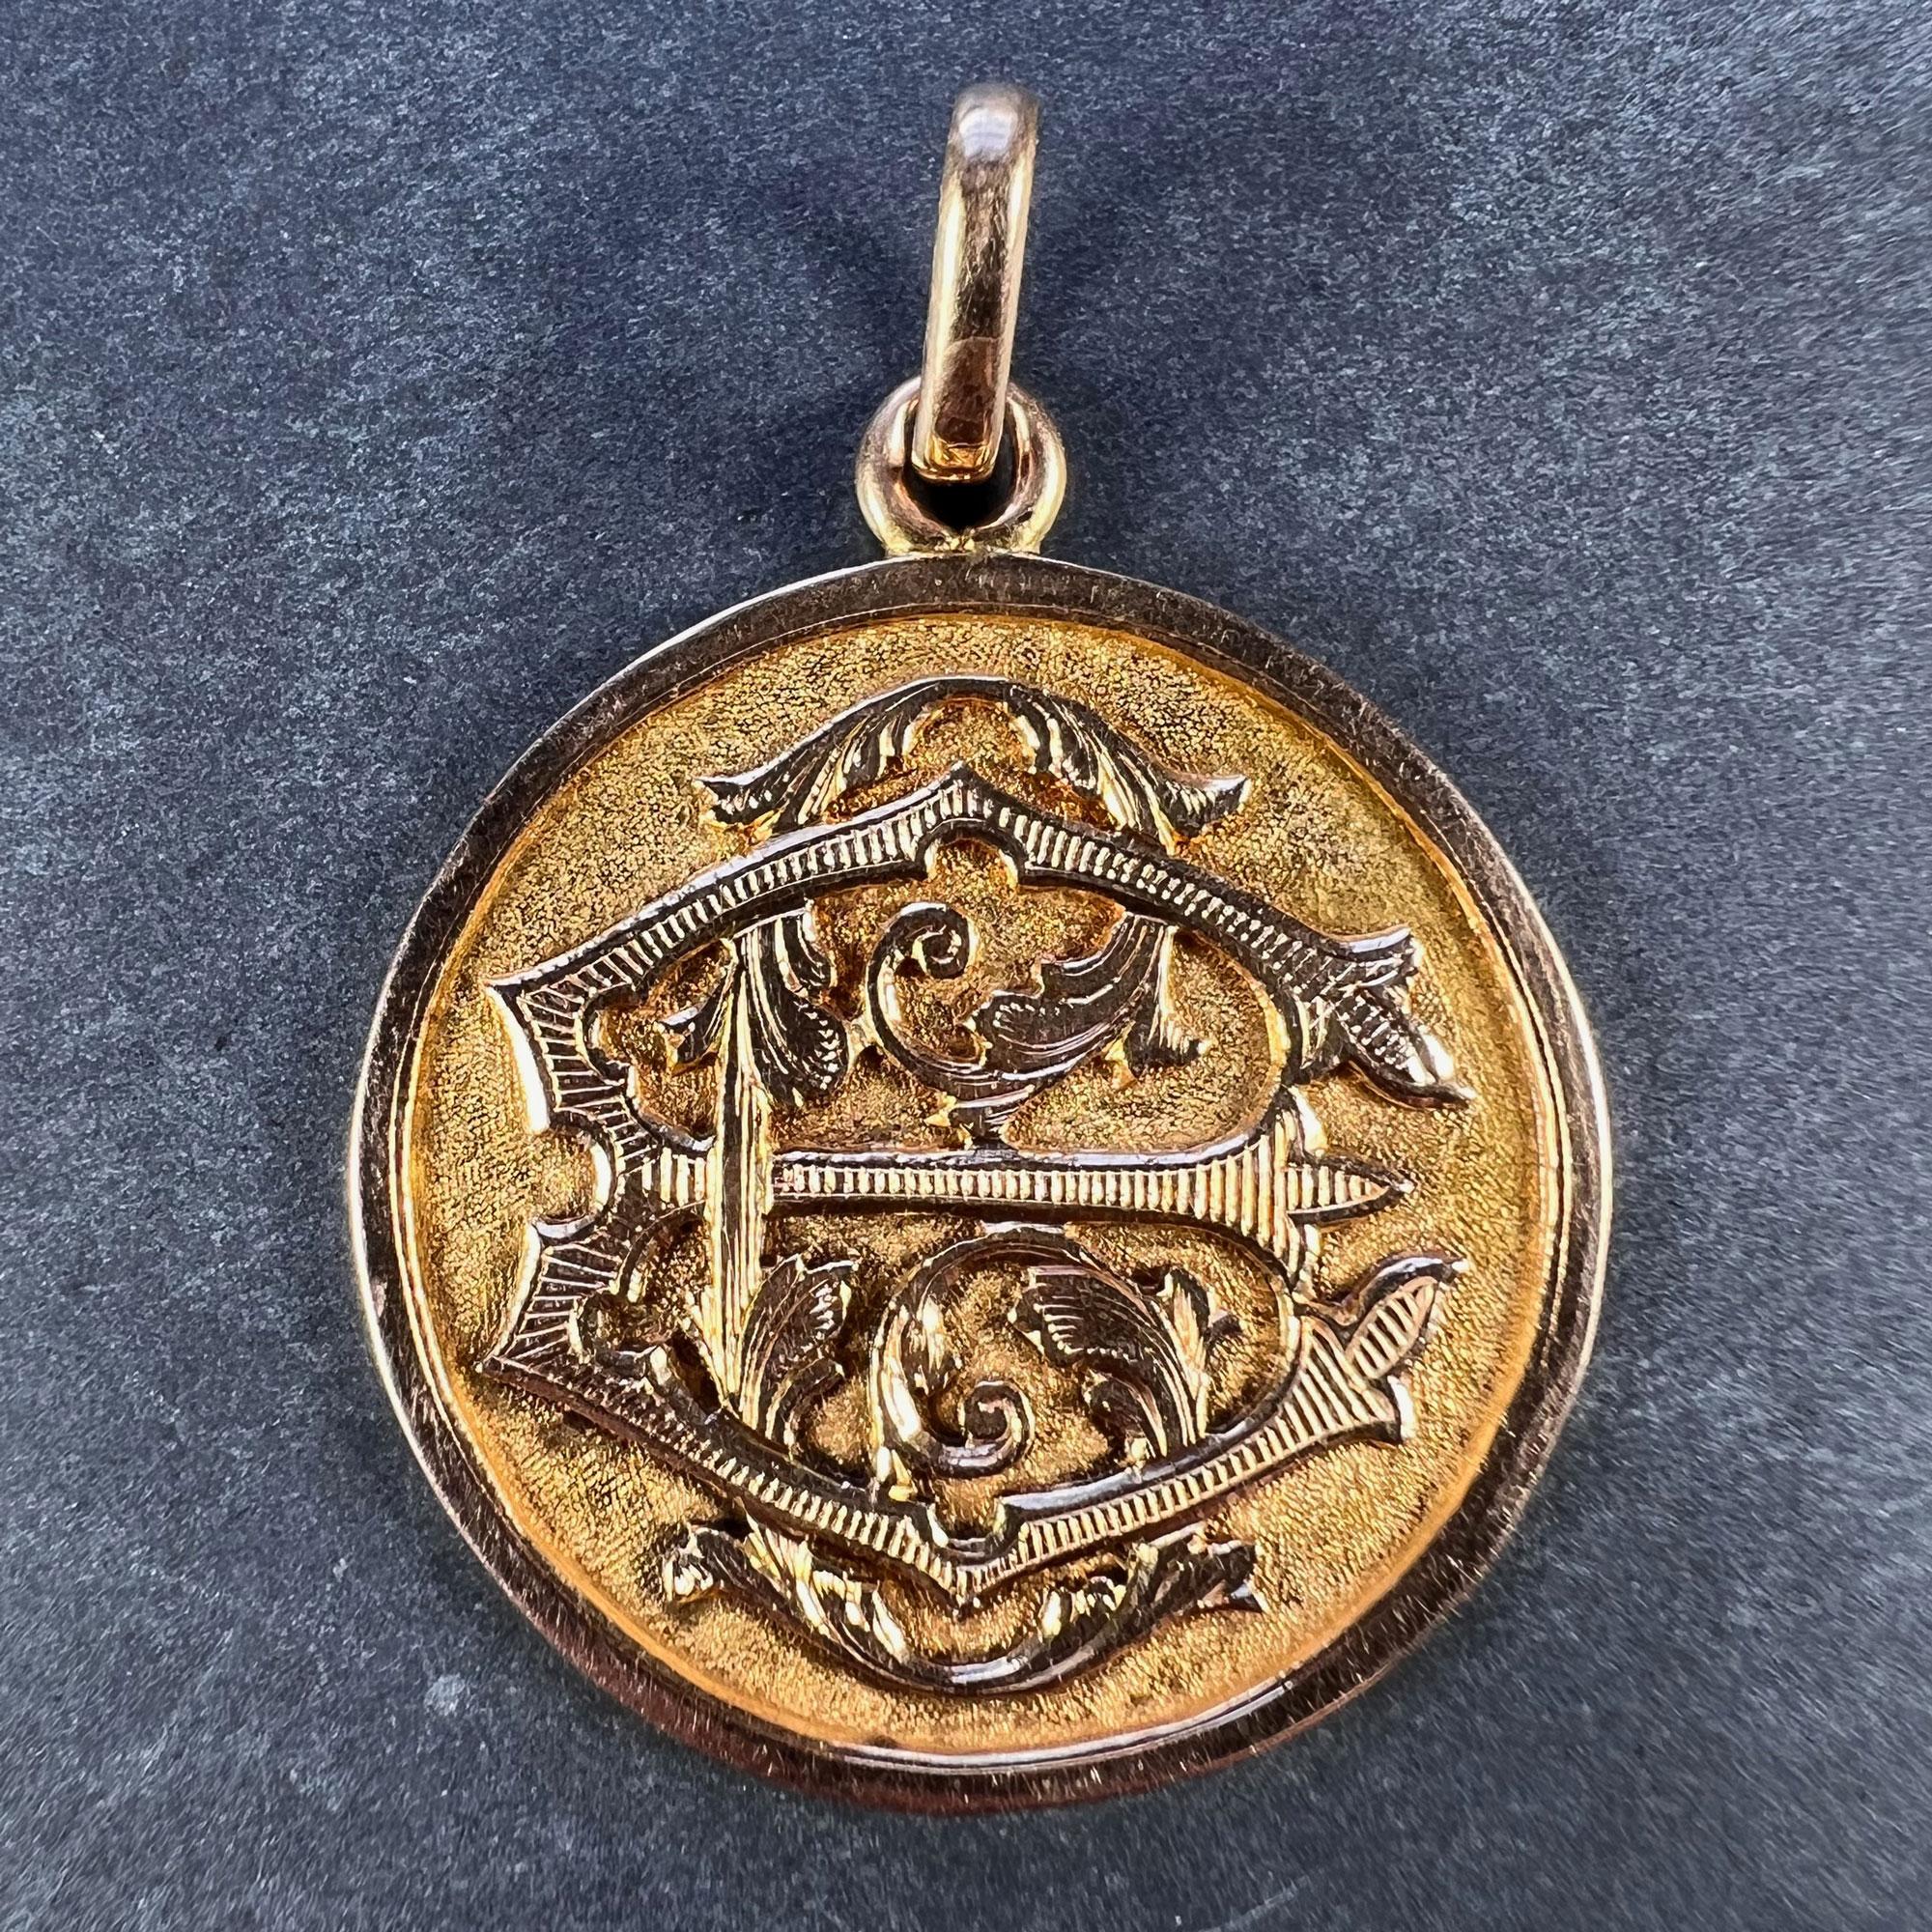 A French 18 karat (18K) rose gold charm pendant designed as a medal detailing the monogram EC or CE in raised and engraved script on a textured ground. Engraved to the reverse with a floral motif and the date '3 Juillet 1898'. Unmarked but tested